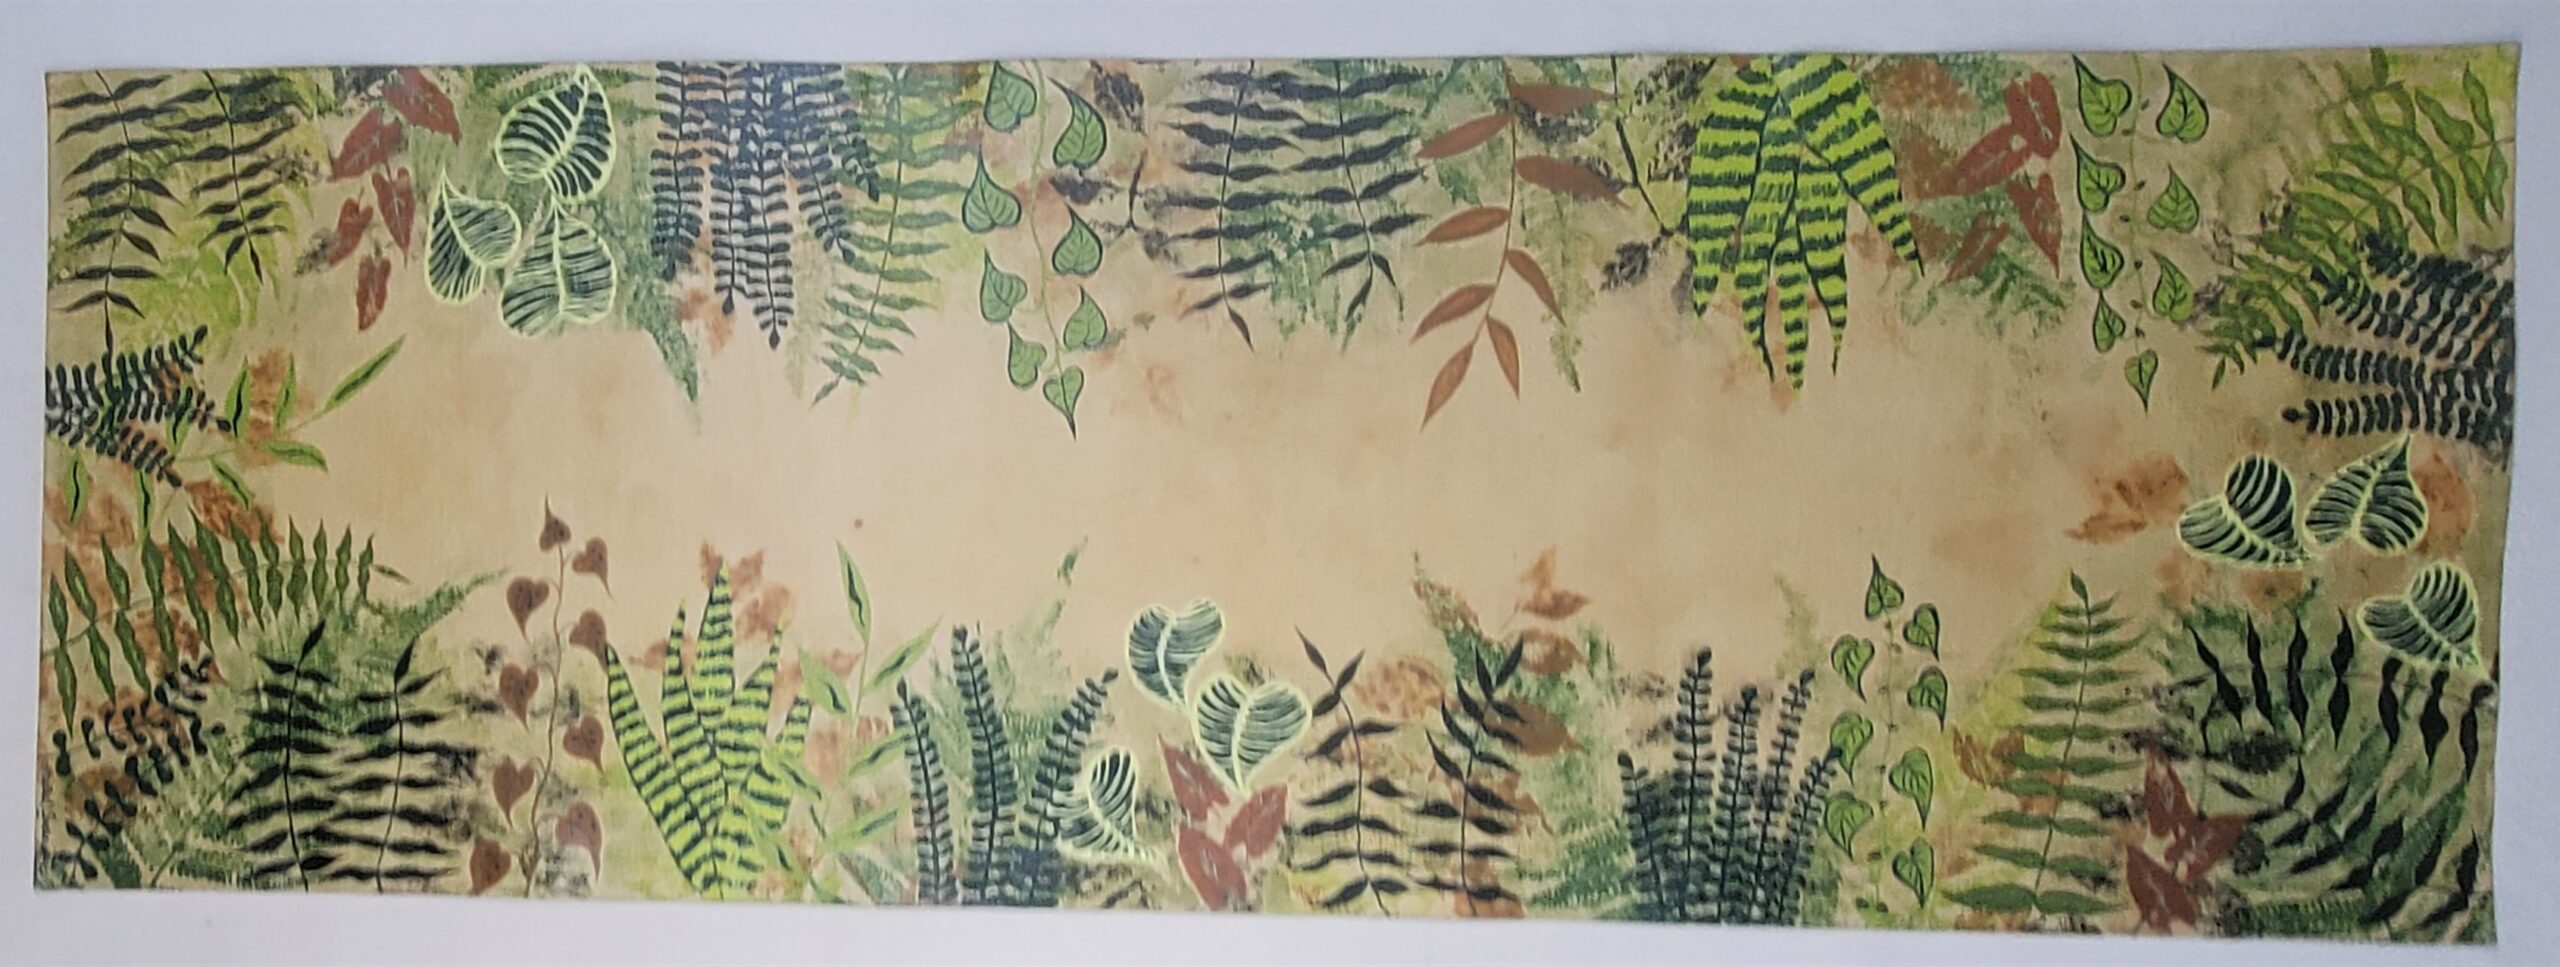 runner rug with tropical plants in greens and browns